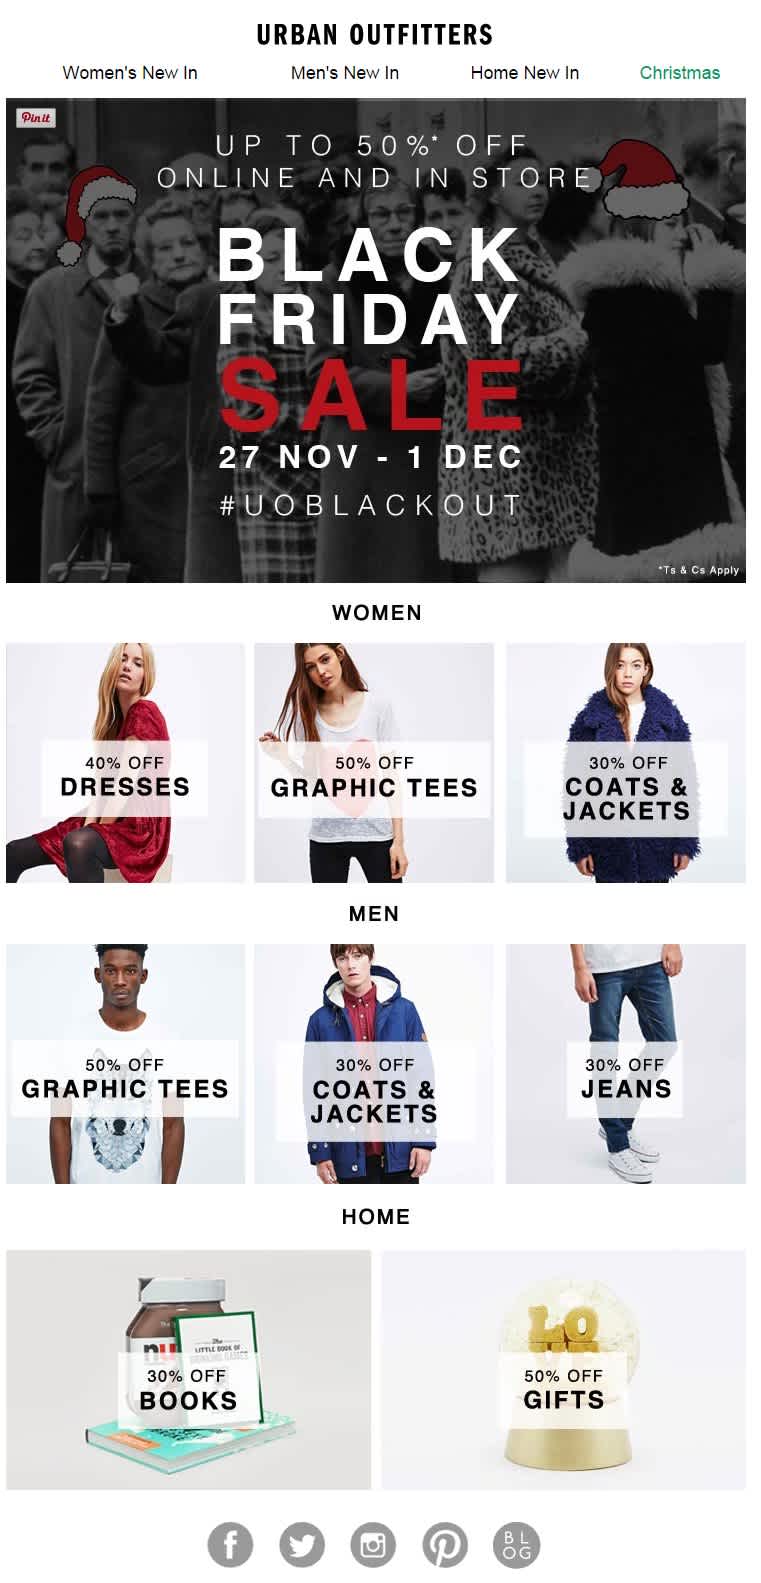 Black Friday email campaign from Urban Outfitters.